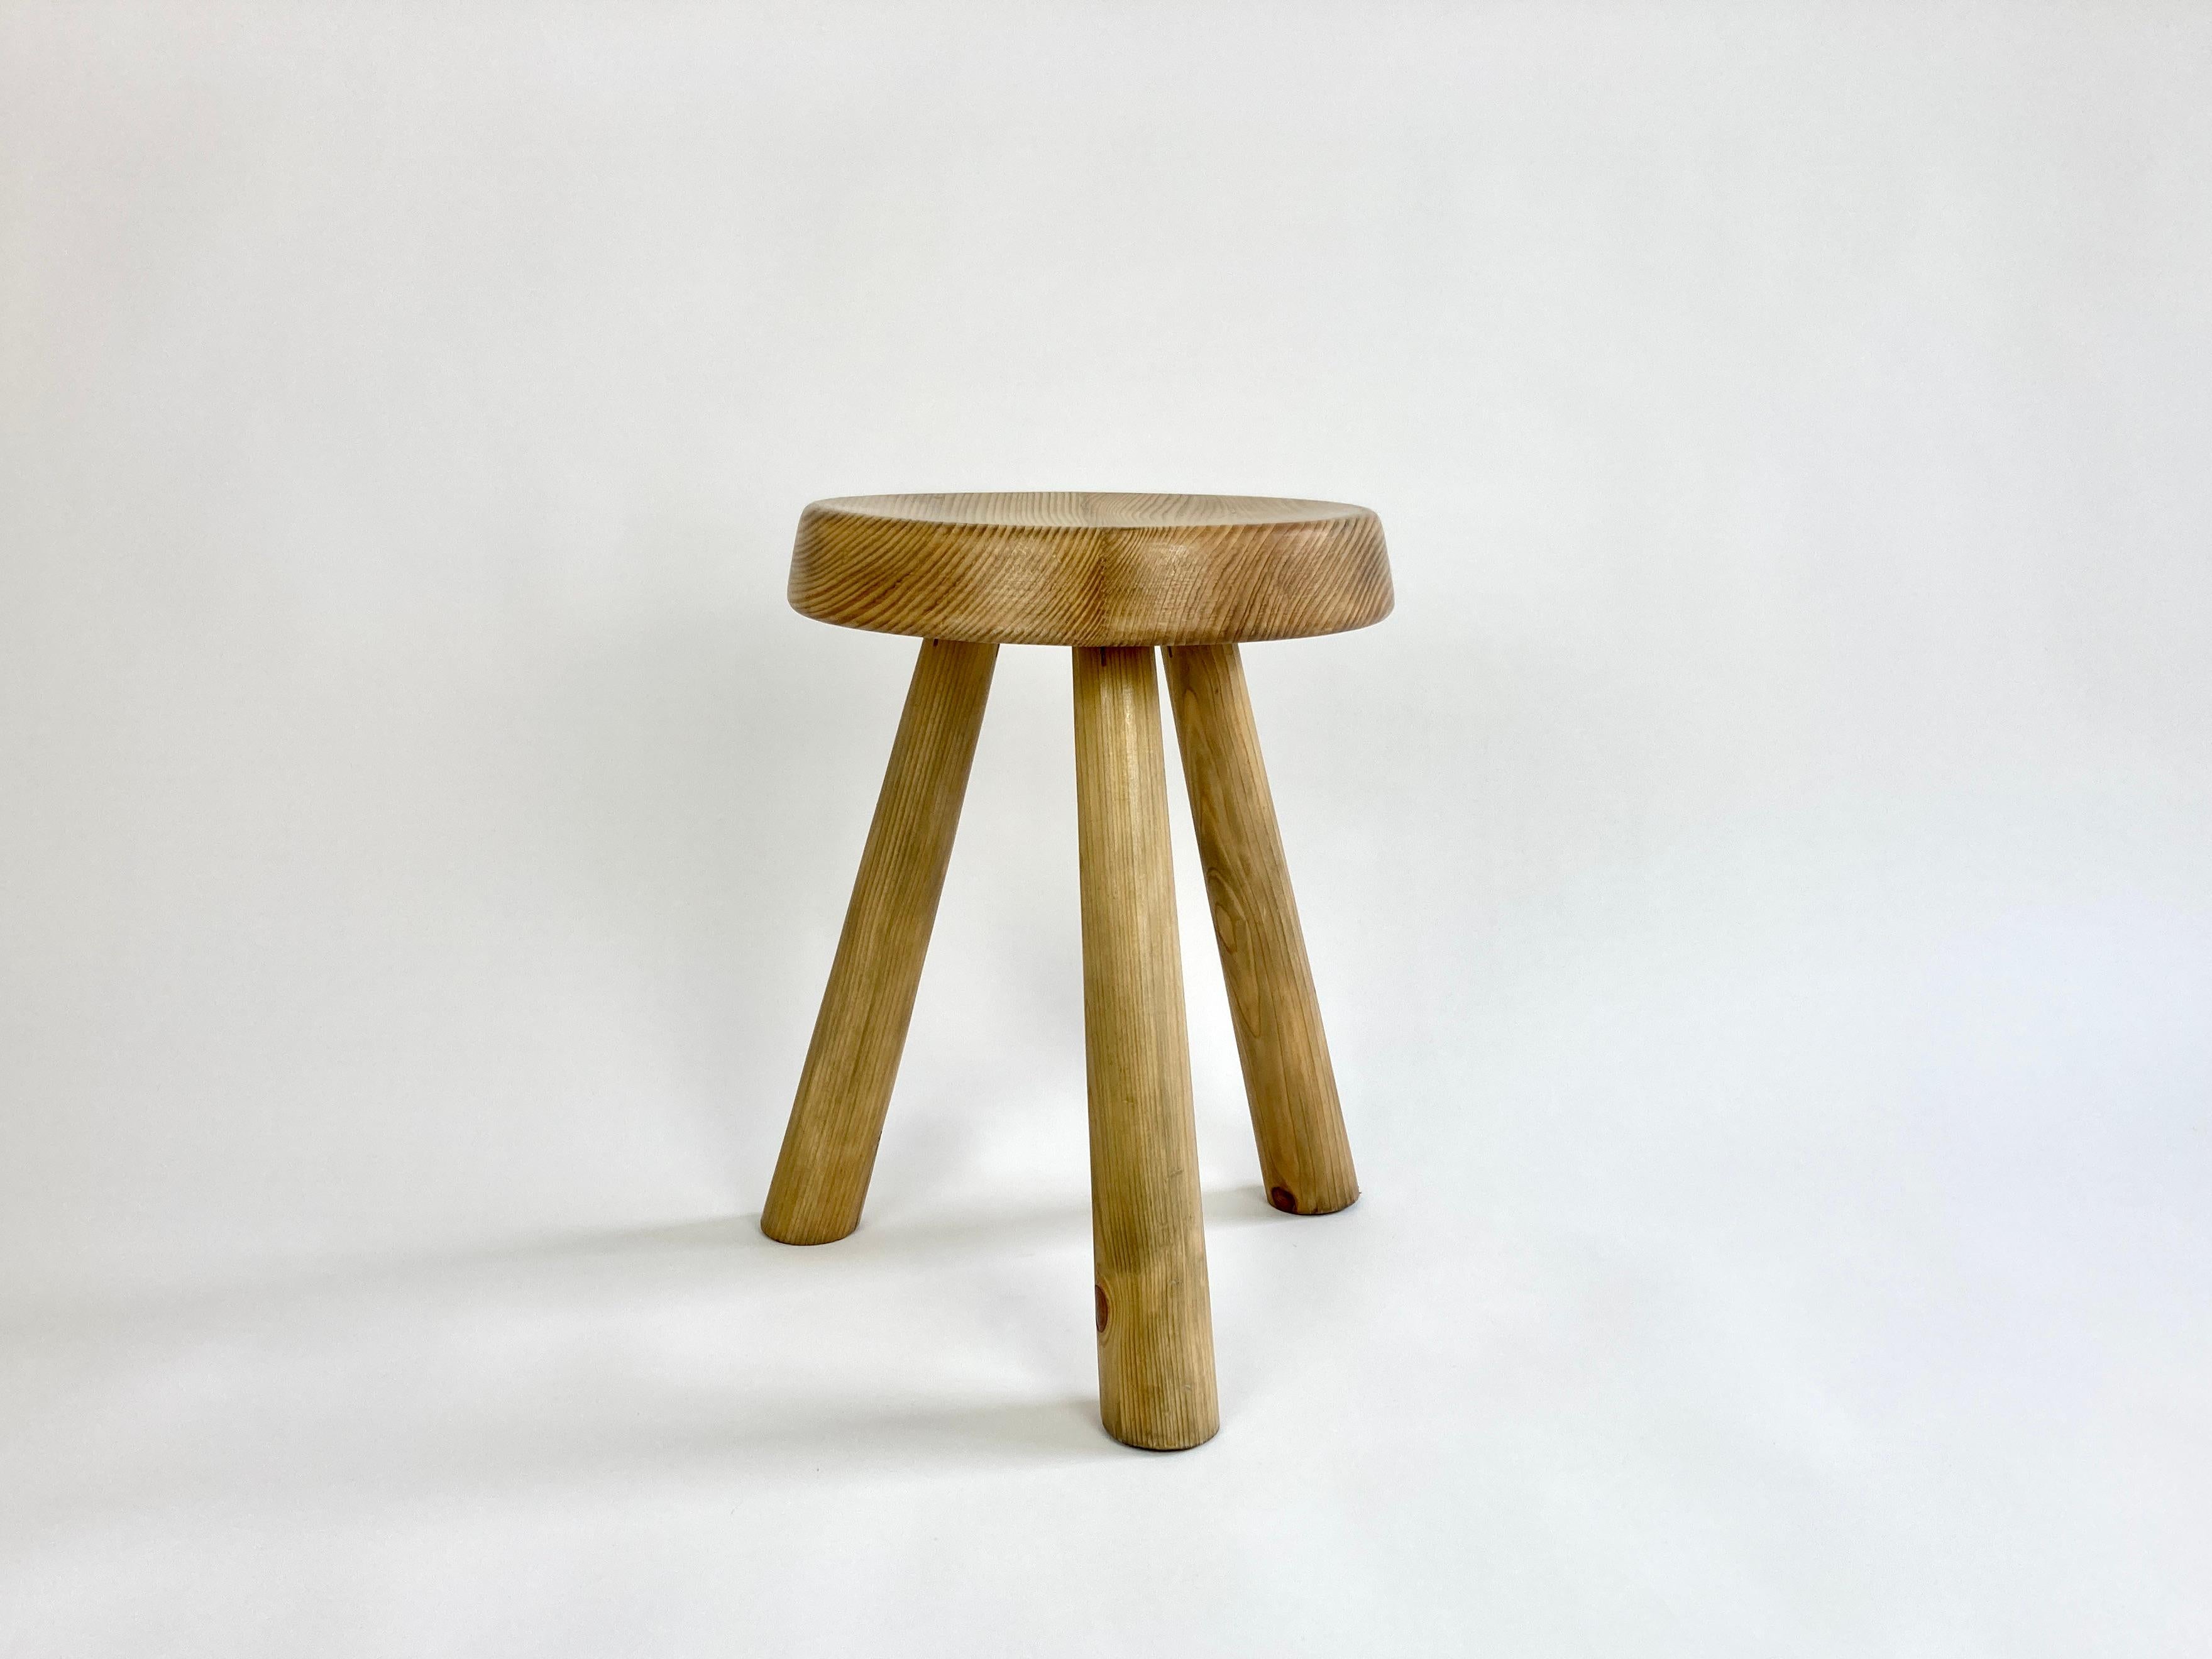 Pine tripod stool by Charlotte Perriand, circa 1960. 

Sourced from Les Arcs, France.

Great condition, the wood has a lovely tone. No damage, no old repairs, age related signs of use as pictured.

Dimensions (cm): 44 height, seat diameter